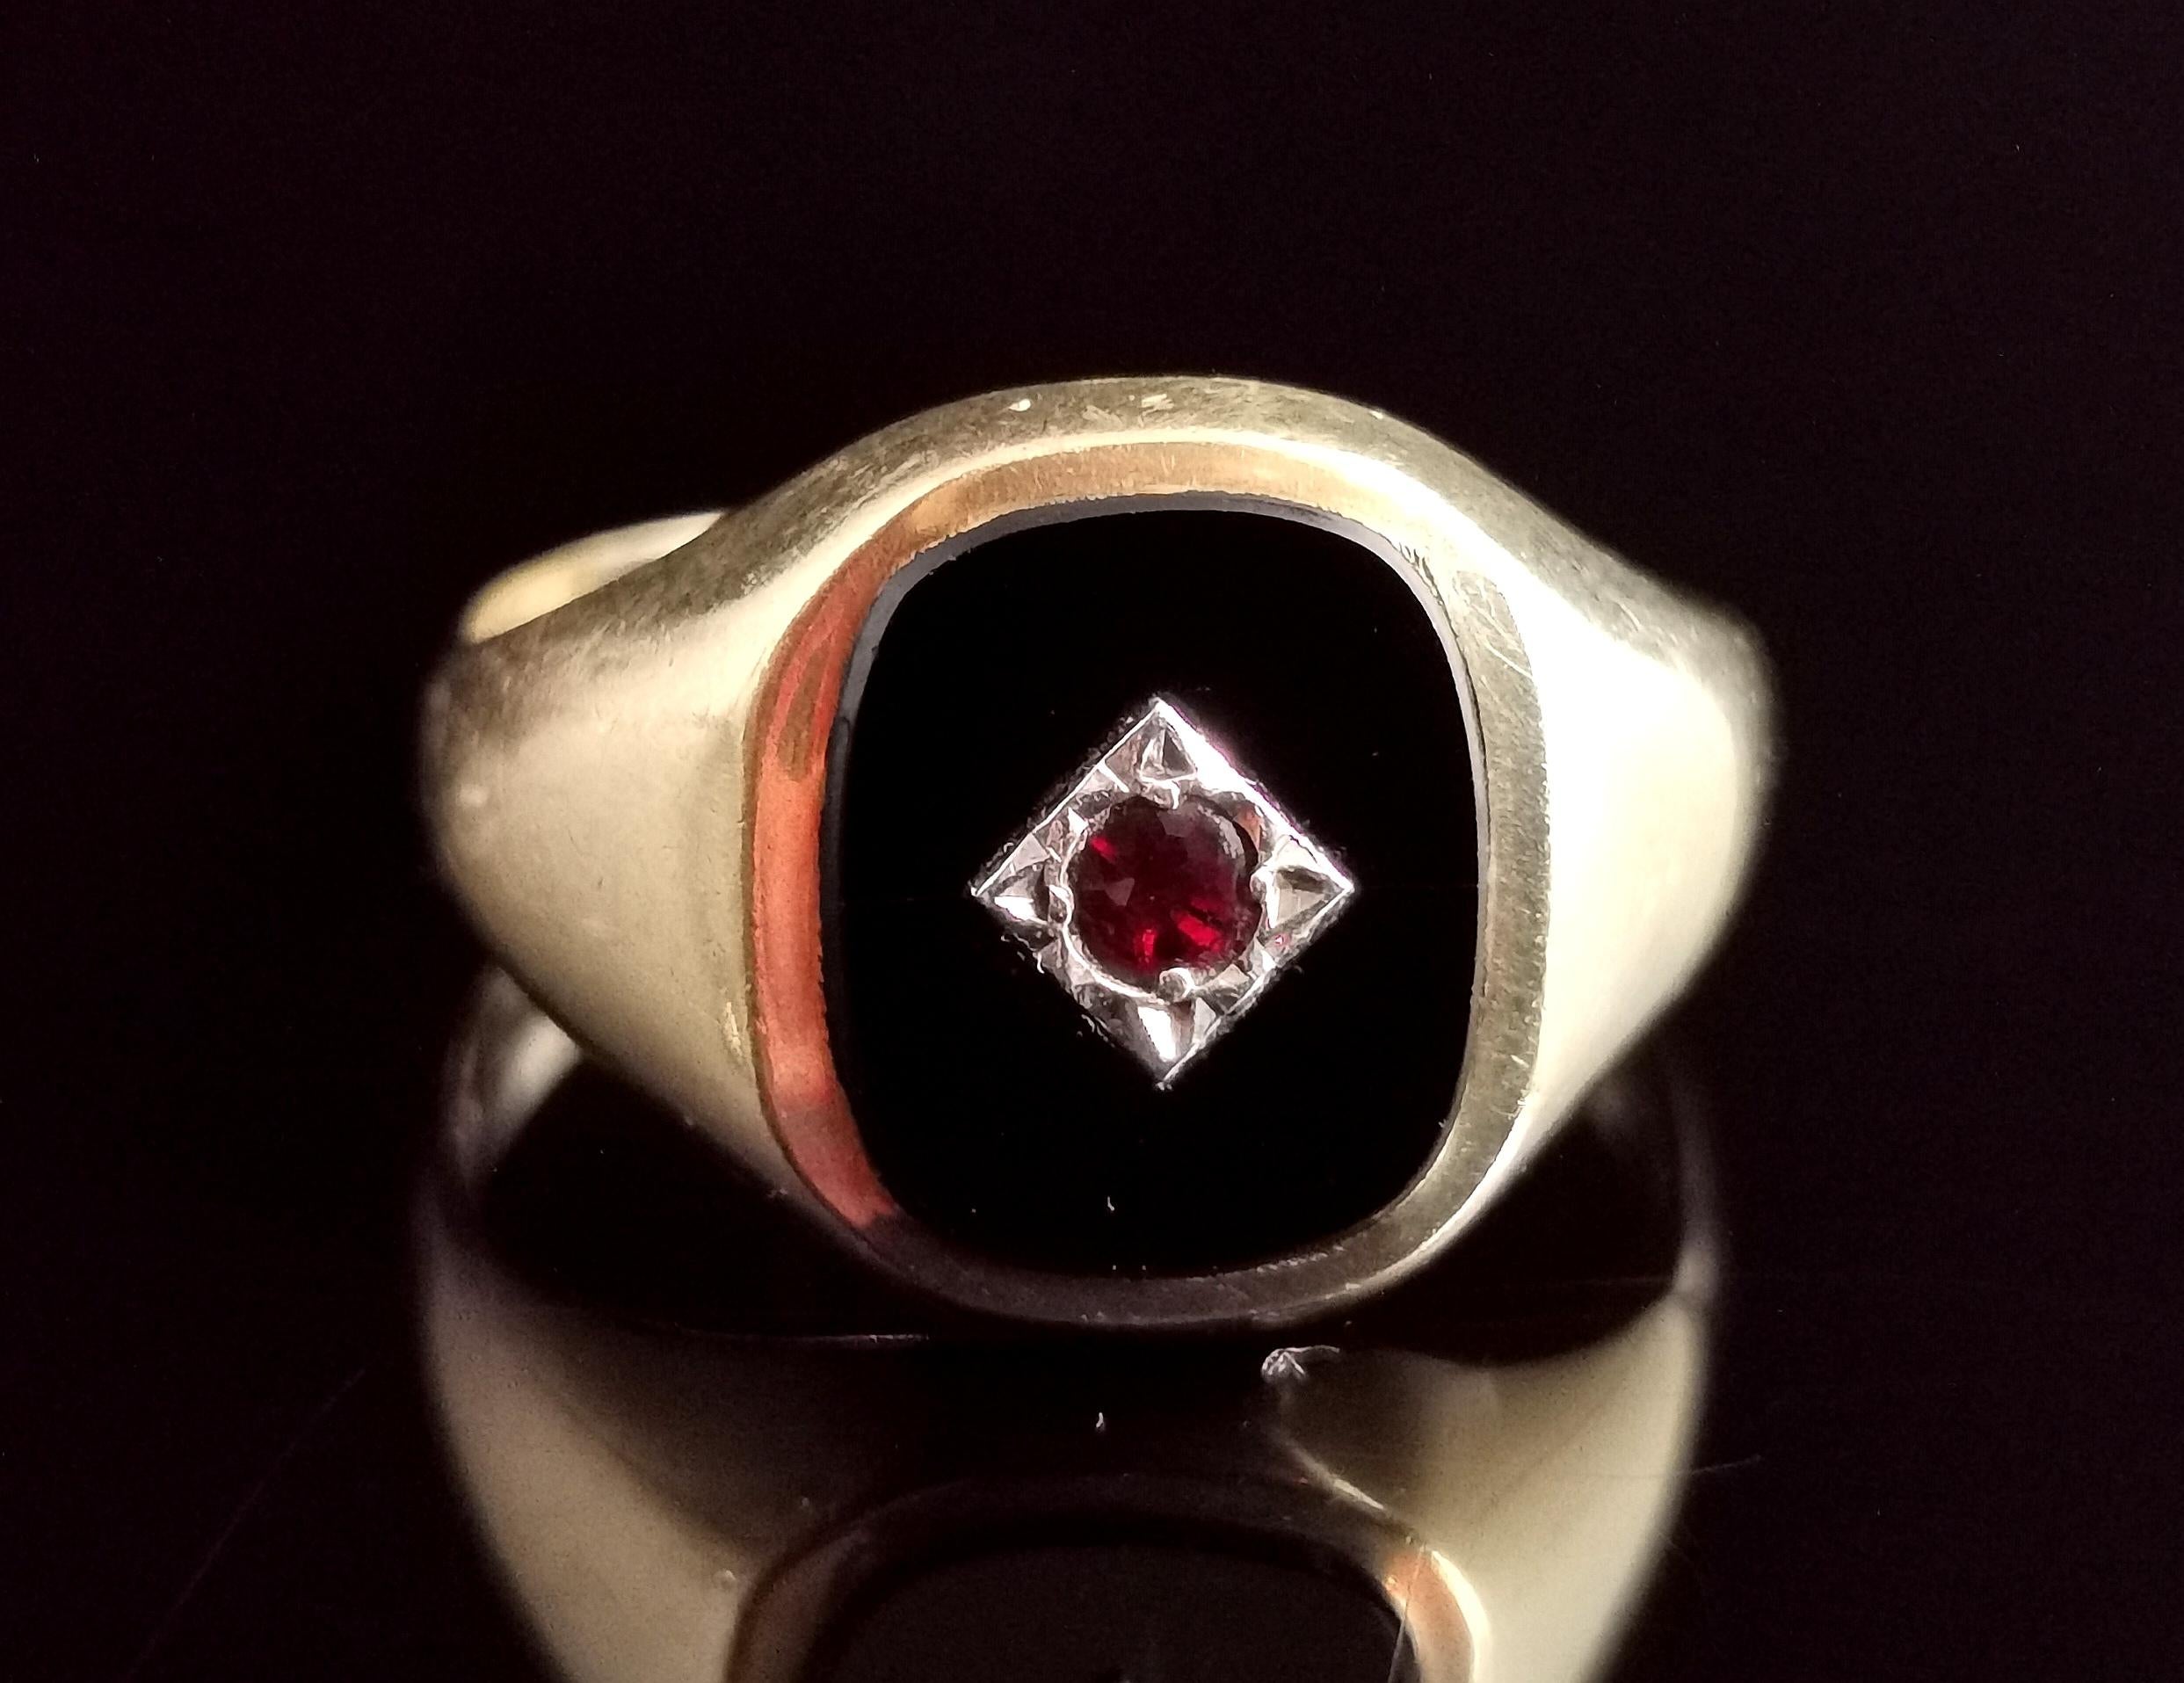 Vintage 9kt yellow gold Onyx and garnet signet ring.

An attractive and chunky gold signet ring with a central black polished onyx panel star set with a single garnet in silver.

It has a smooth yellow gold band with heavy tapering shoulders.

It is